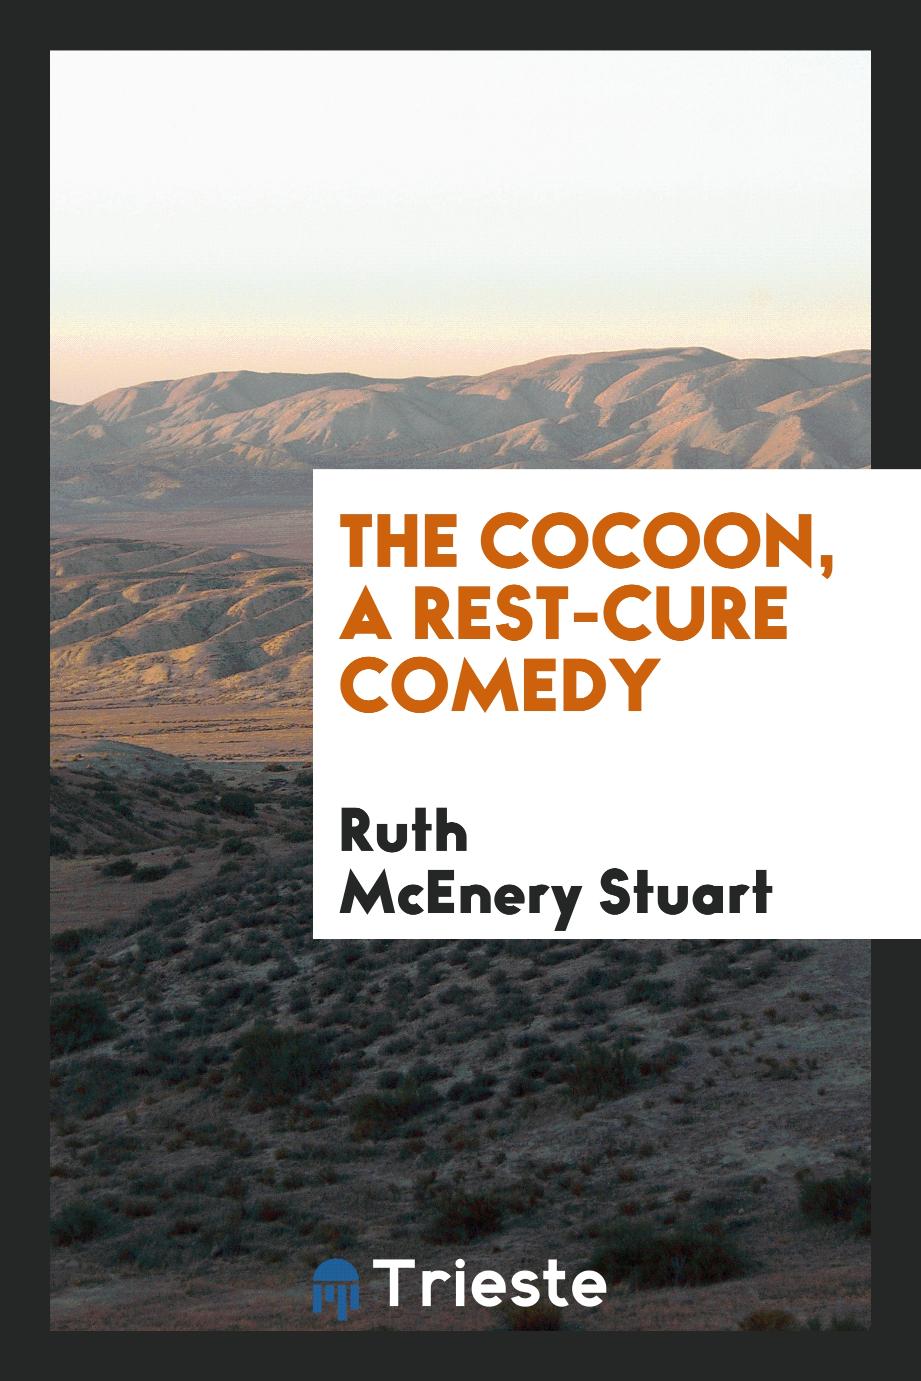 The Cocoon, a Rest-Cure Comedy